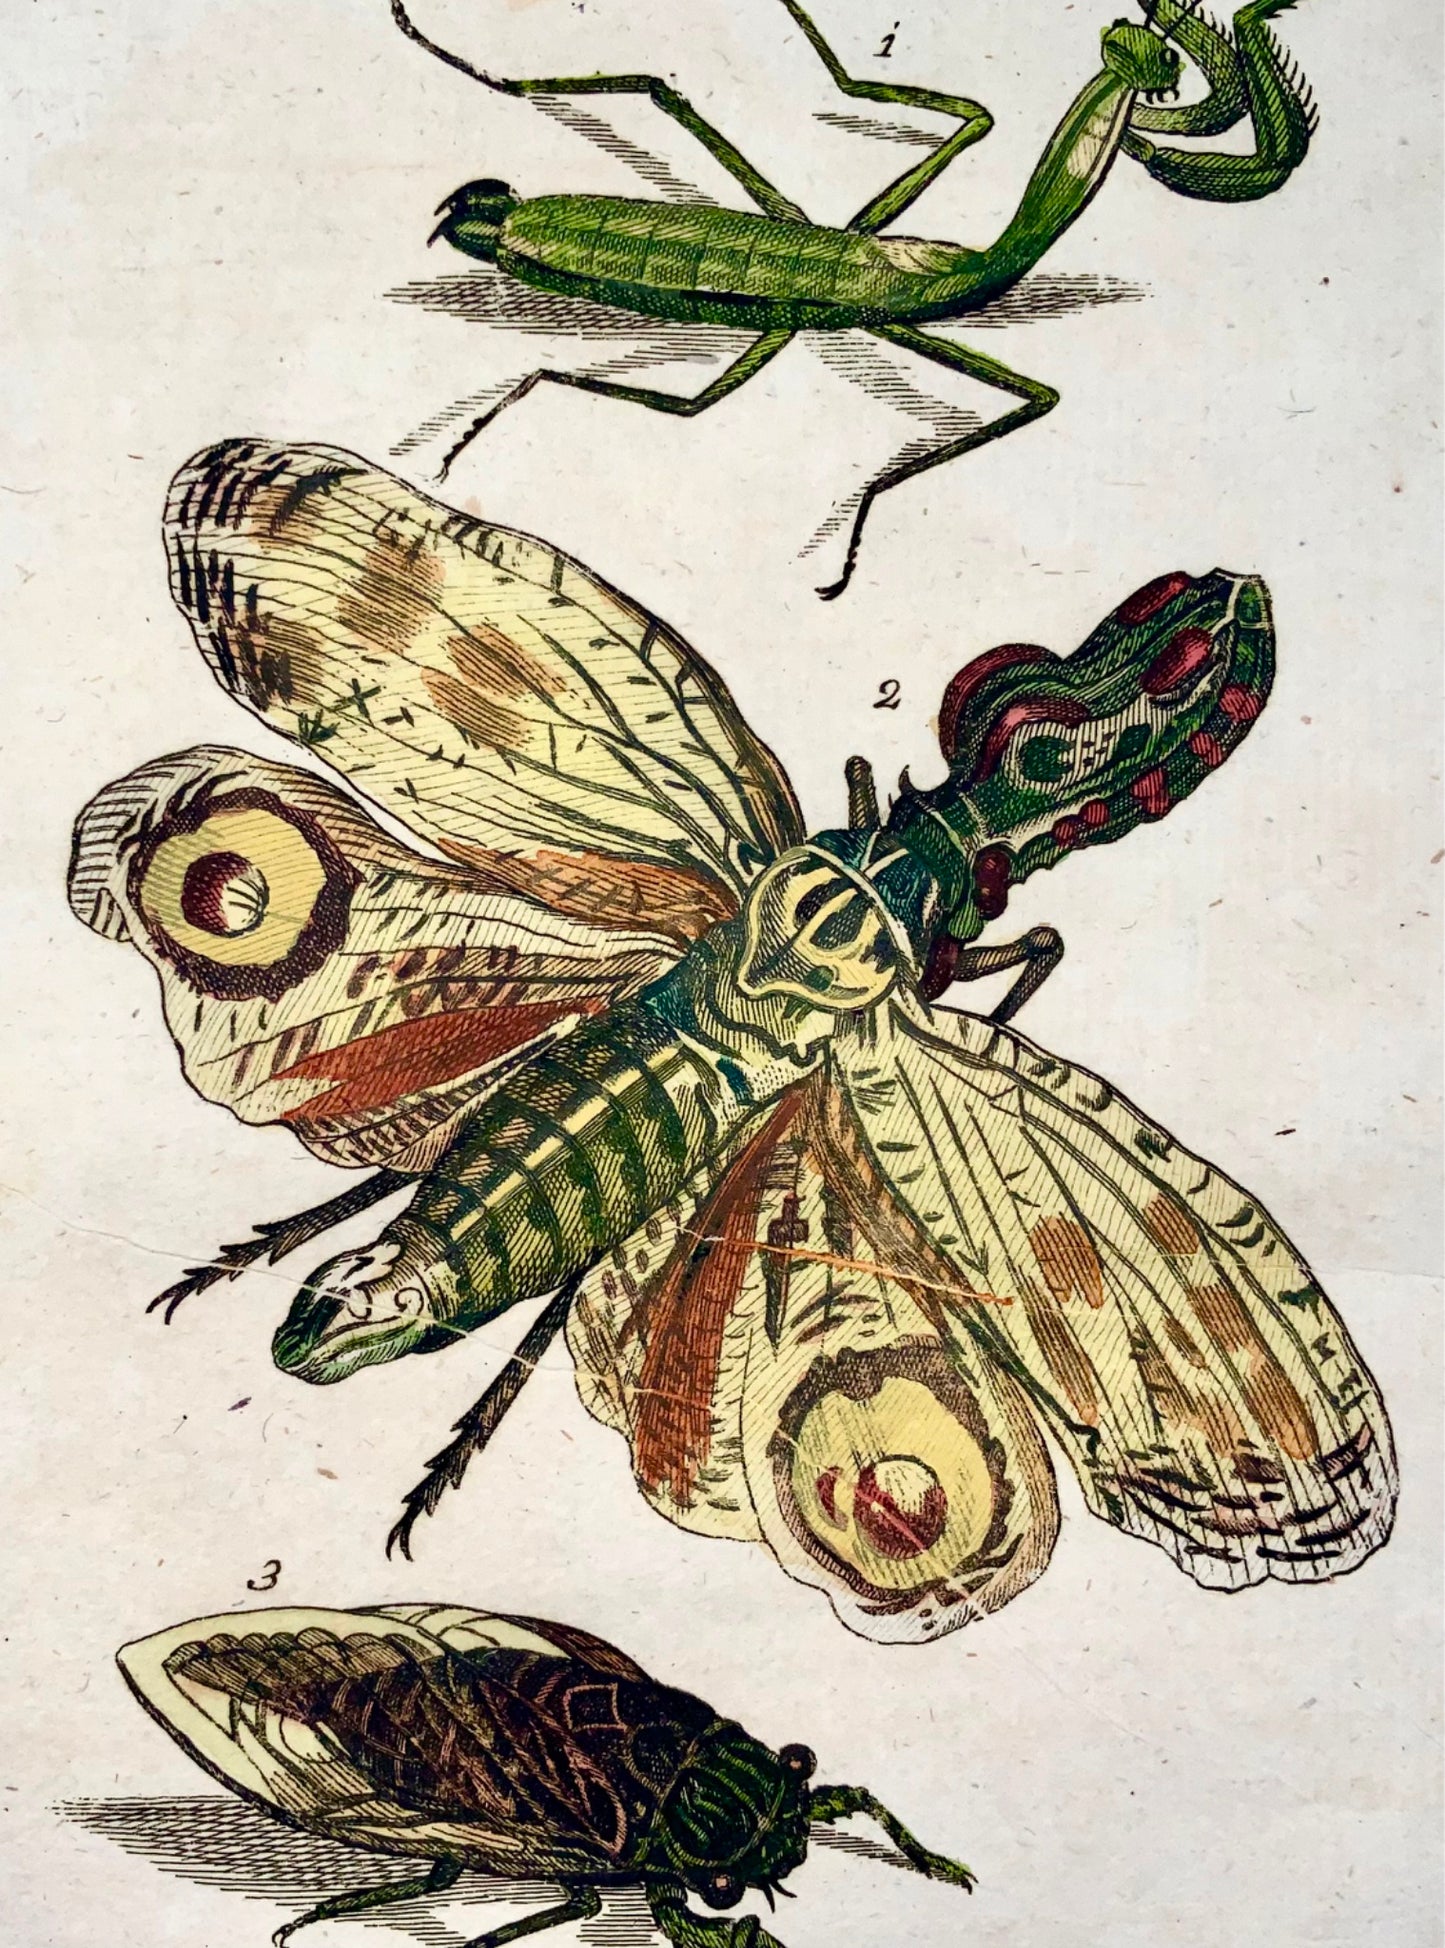 1790 Flying Mantis, Insects, Joh. Sollerer hand coloured engraving